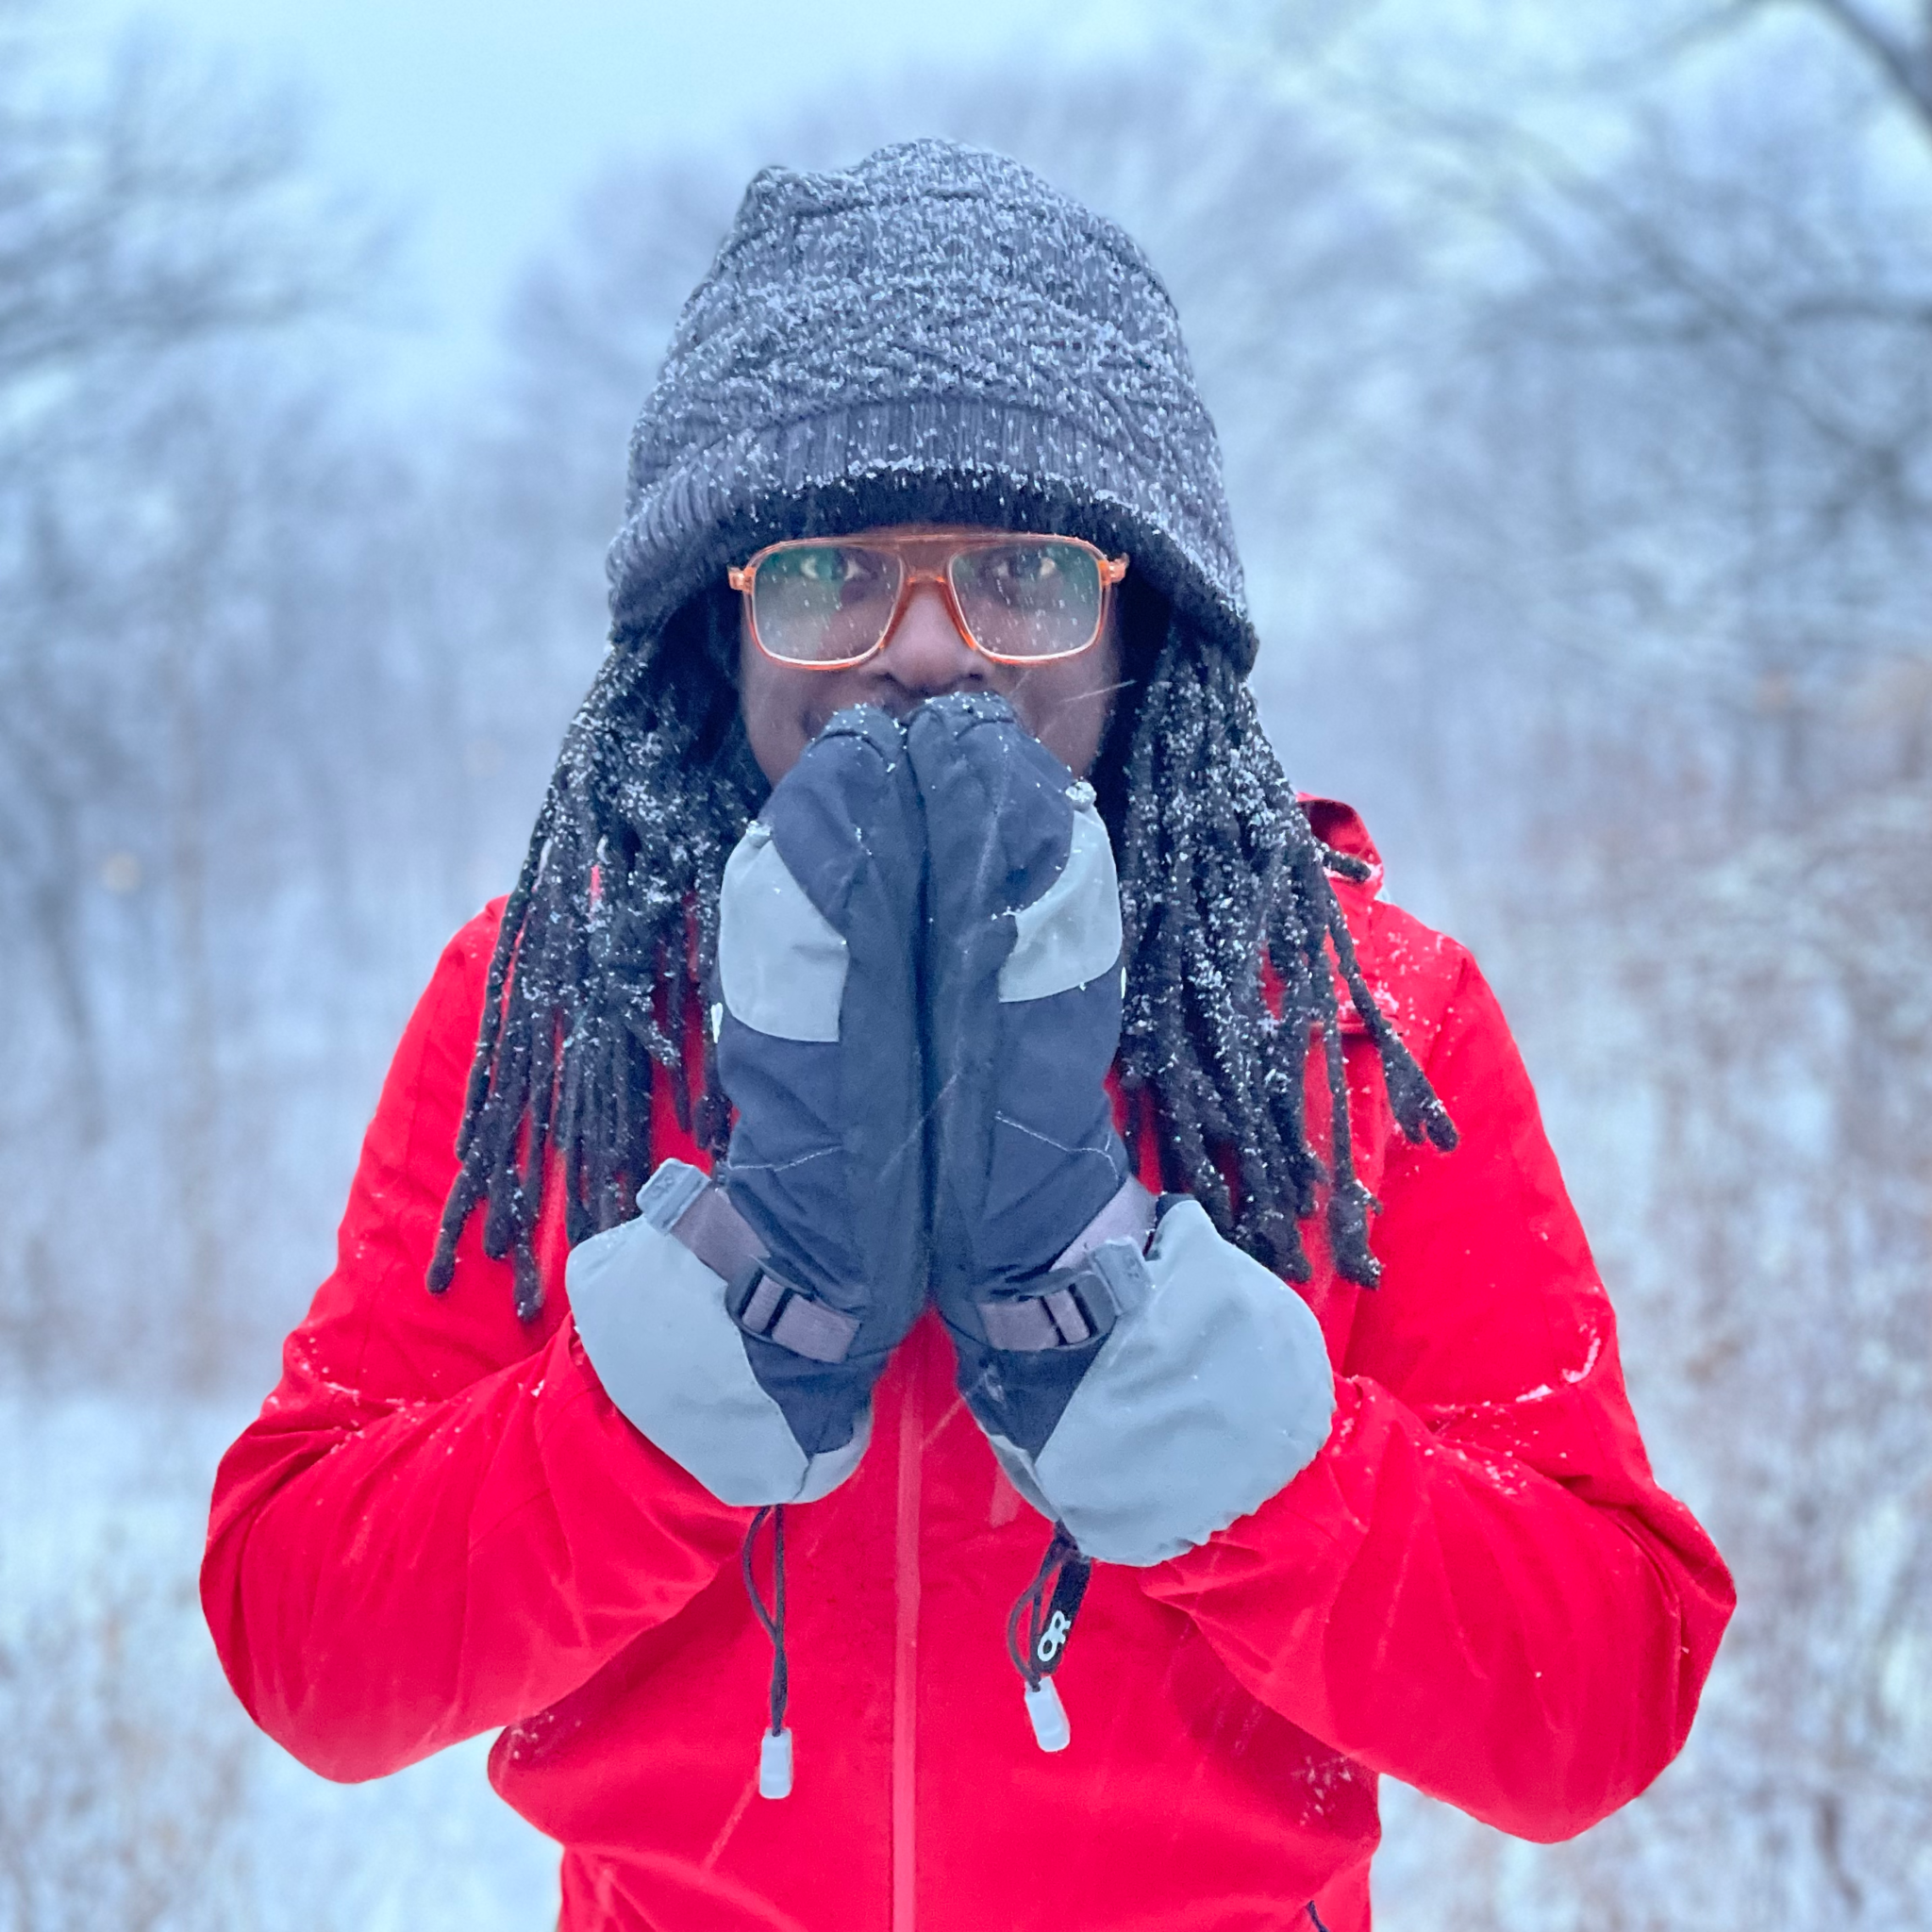 A person with dark skin and long locs stands under falling snow with their hands in prayer position.